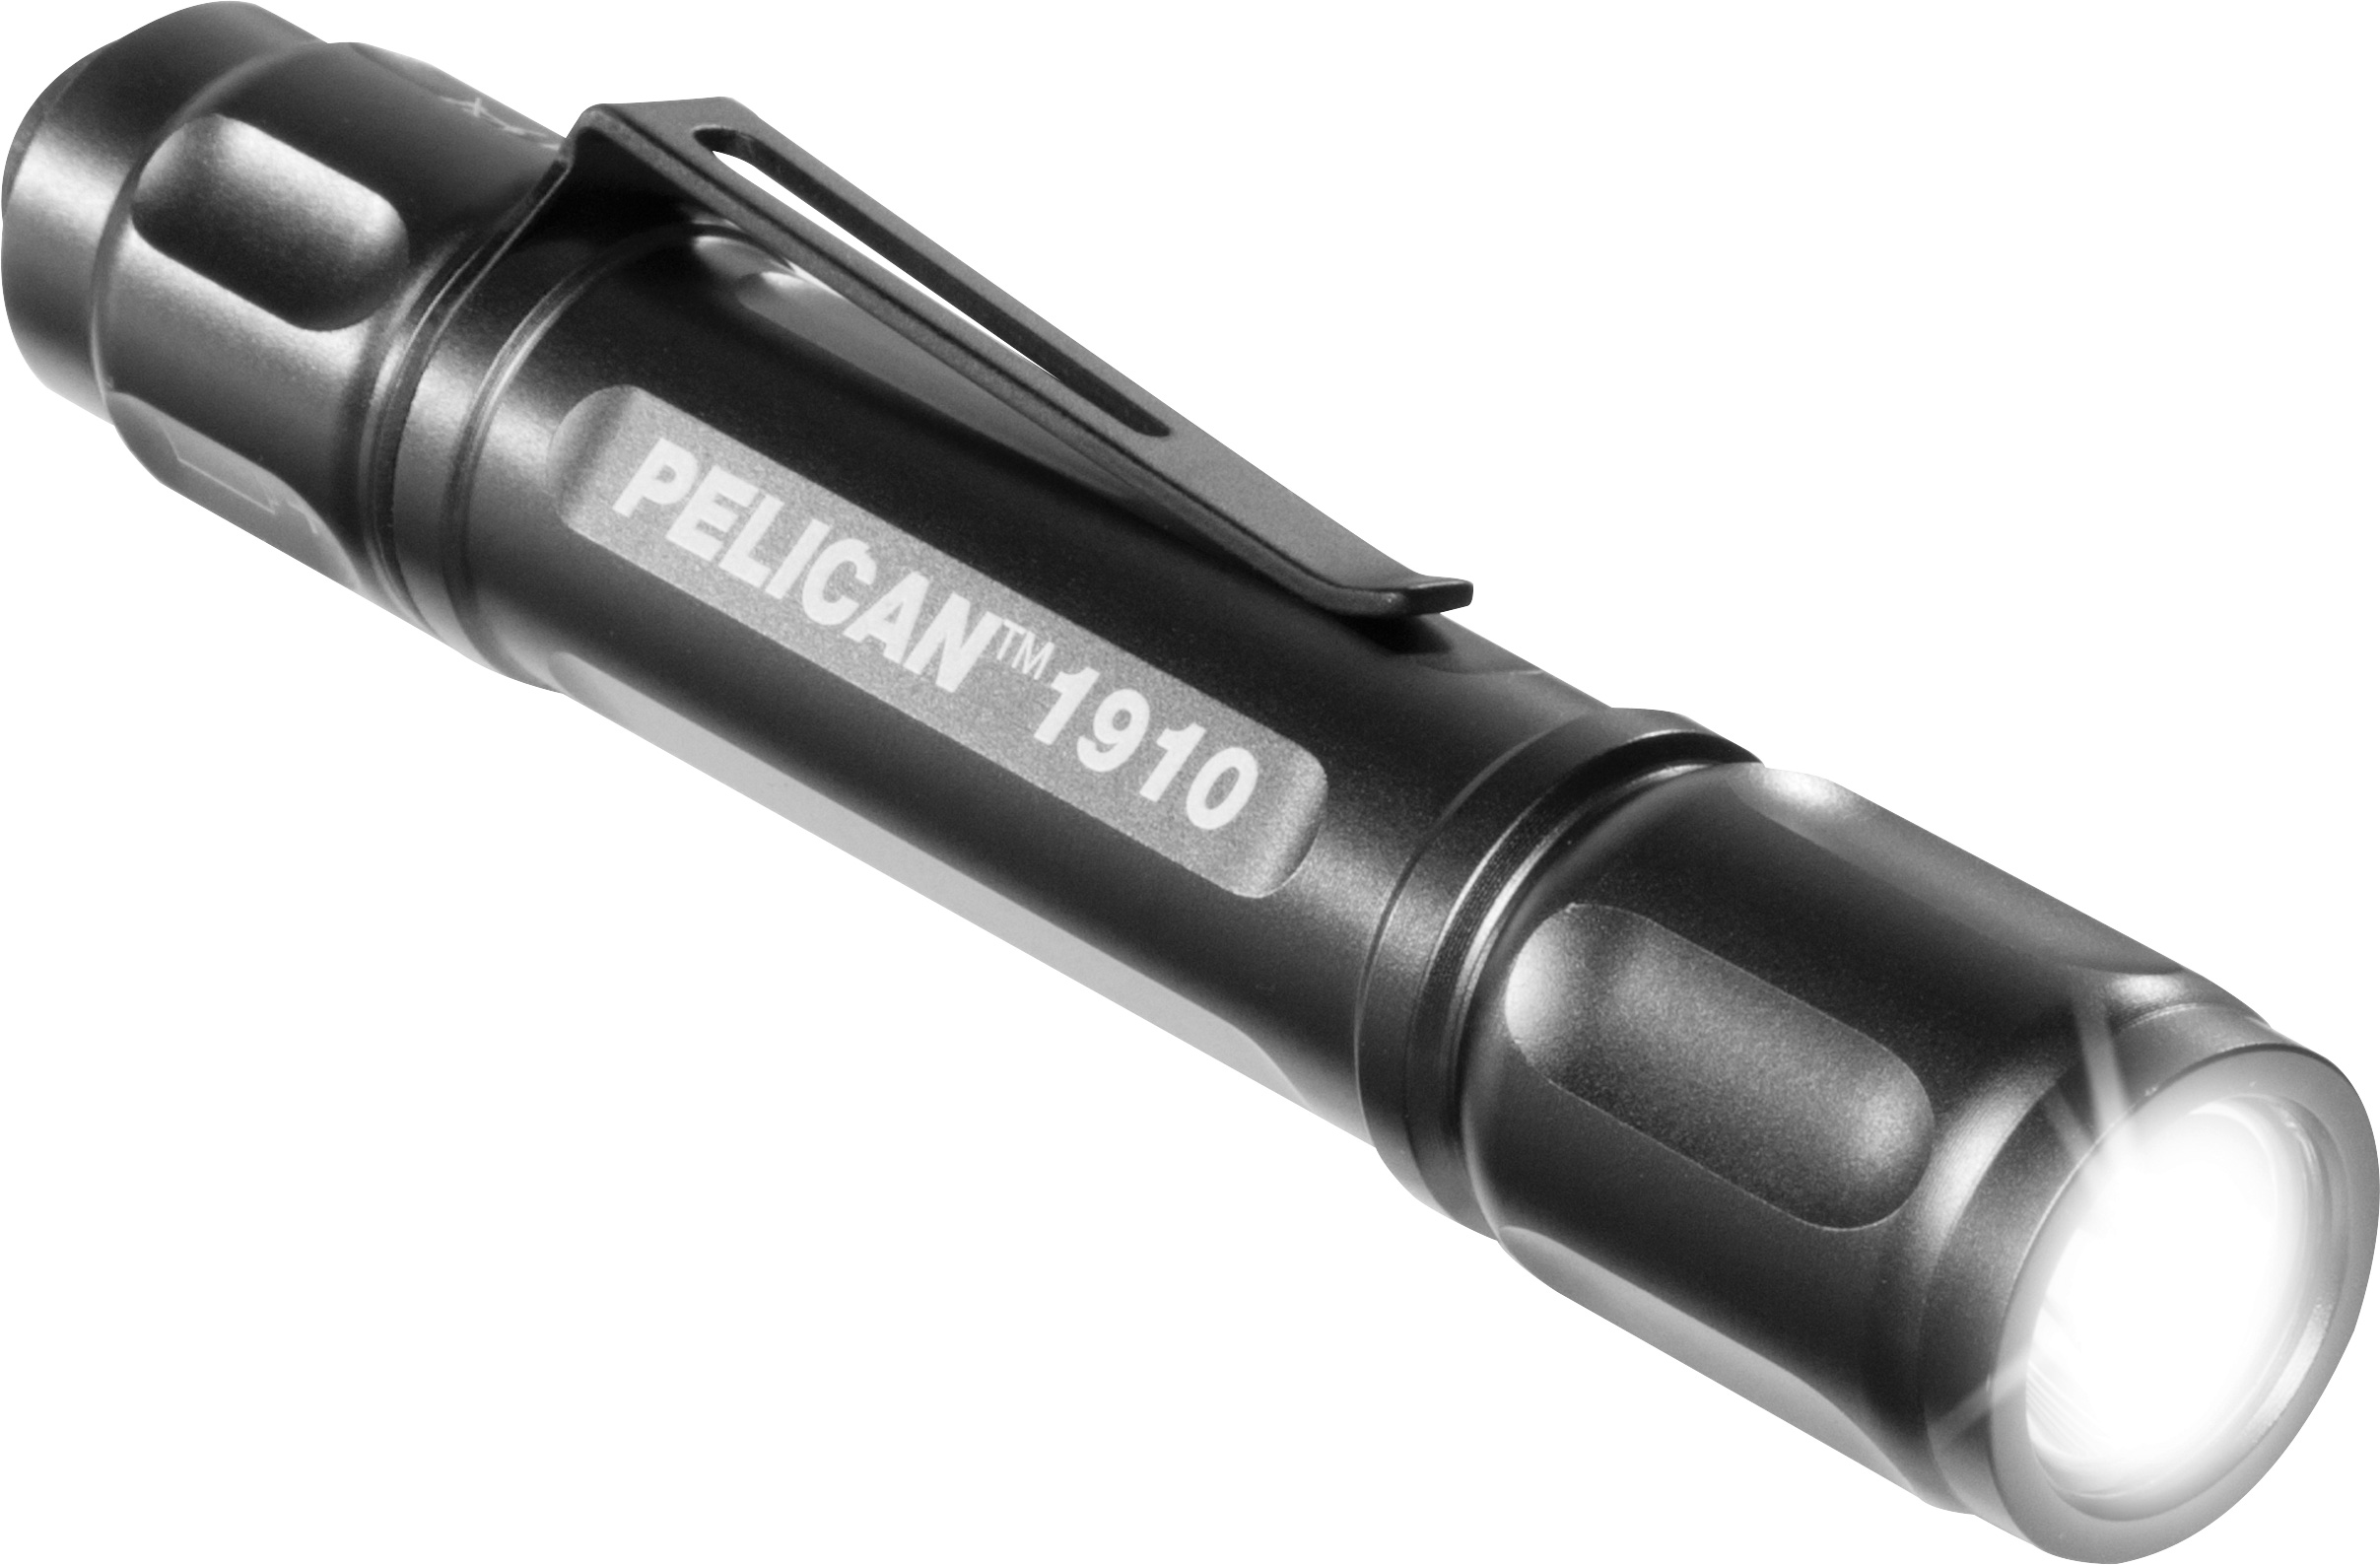 Pelican 1910 Aluminum LED Flashlight w/ 106 Lumens $2.41 Off Star  Rating Free Shipping over $49!